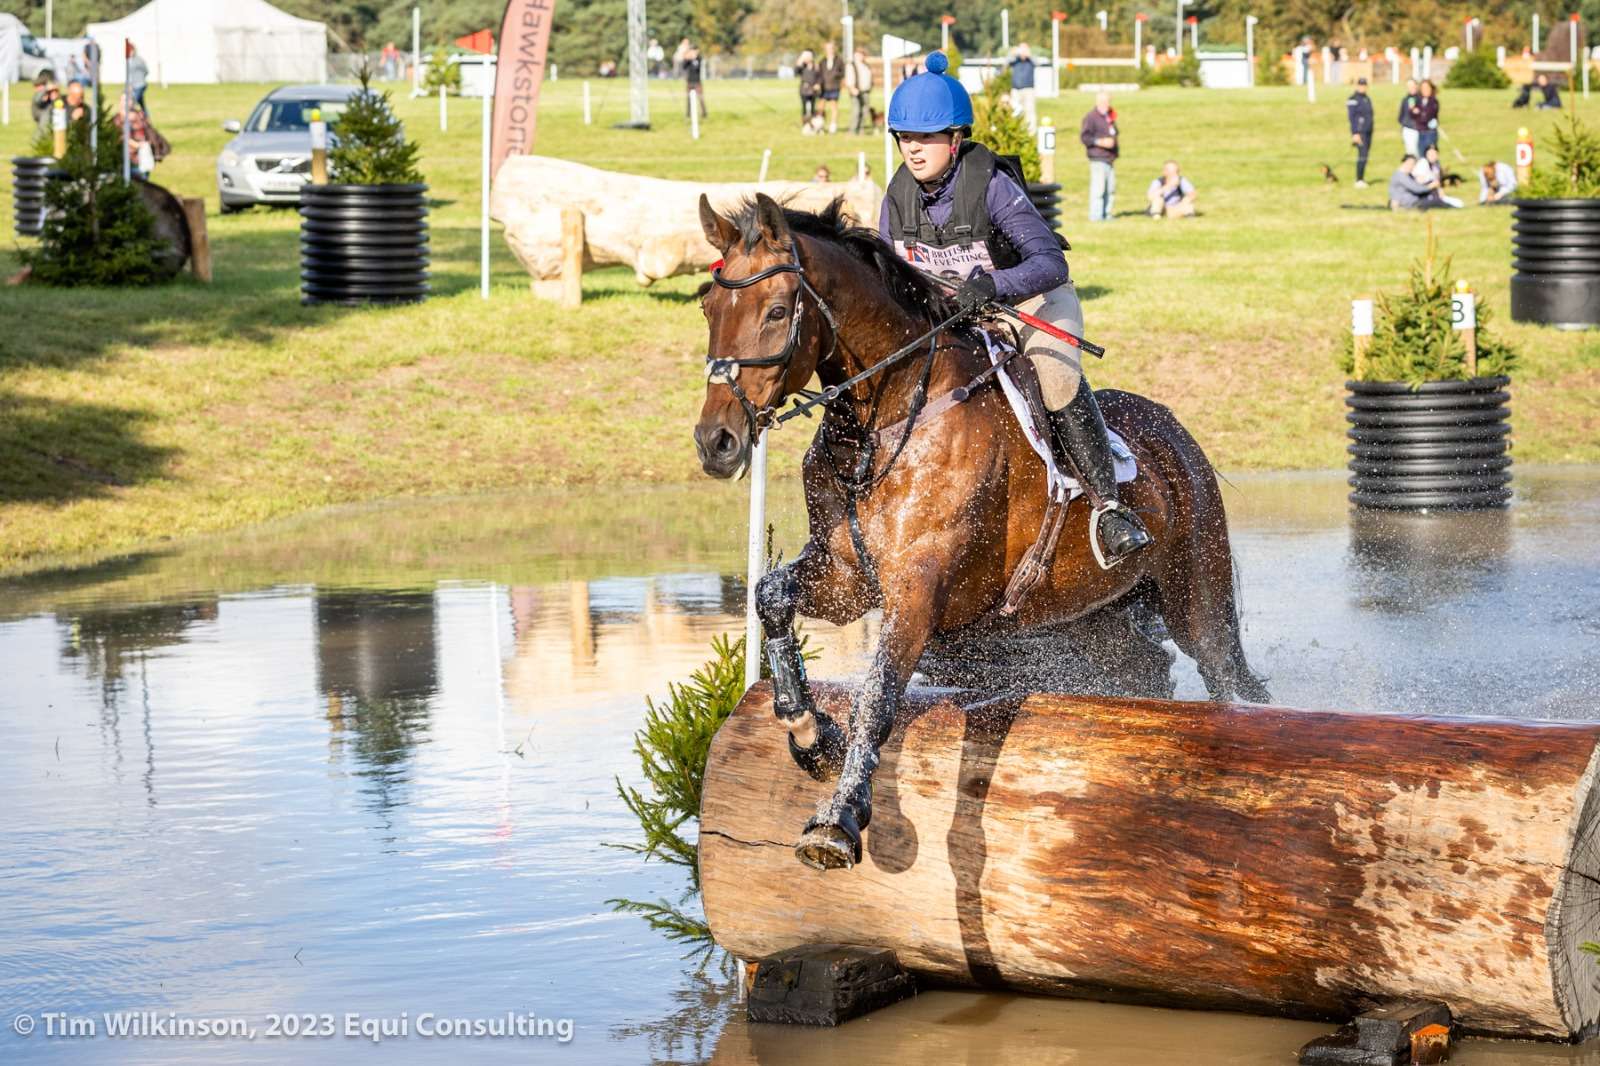 Winners Crowned and Cross-Country Action Spans Saturday at Osberton 